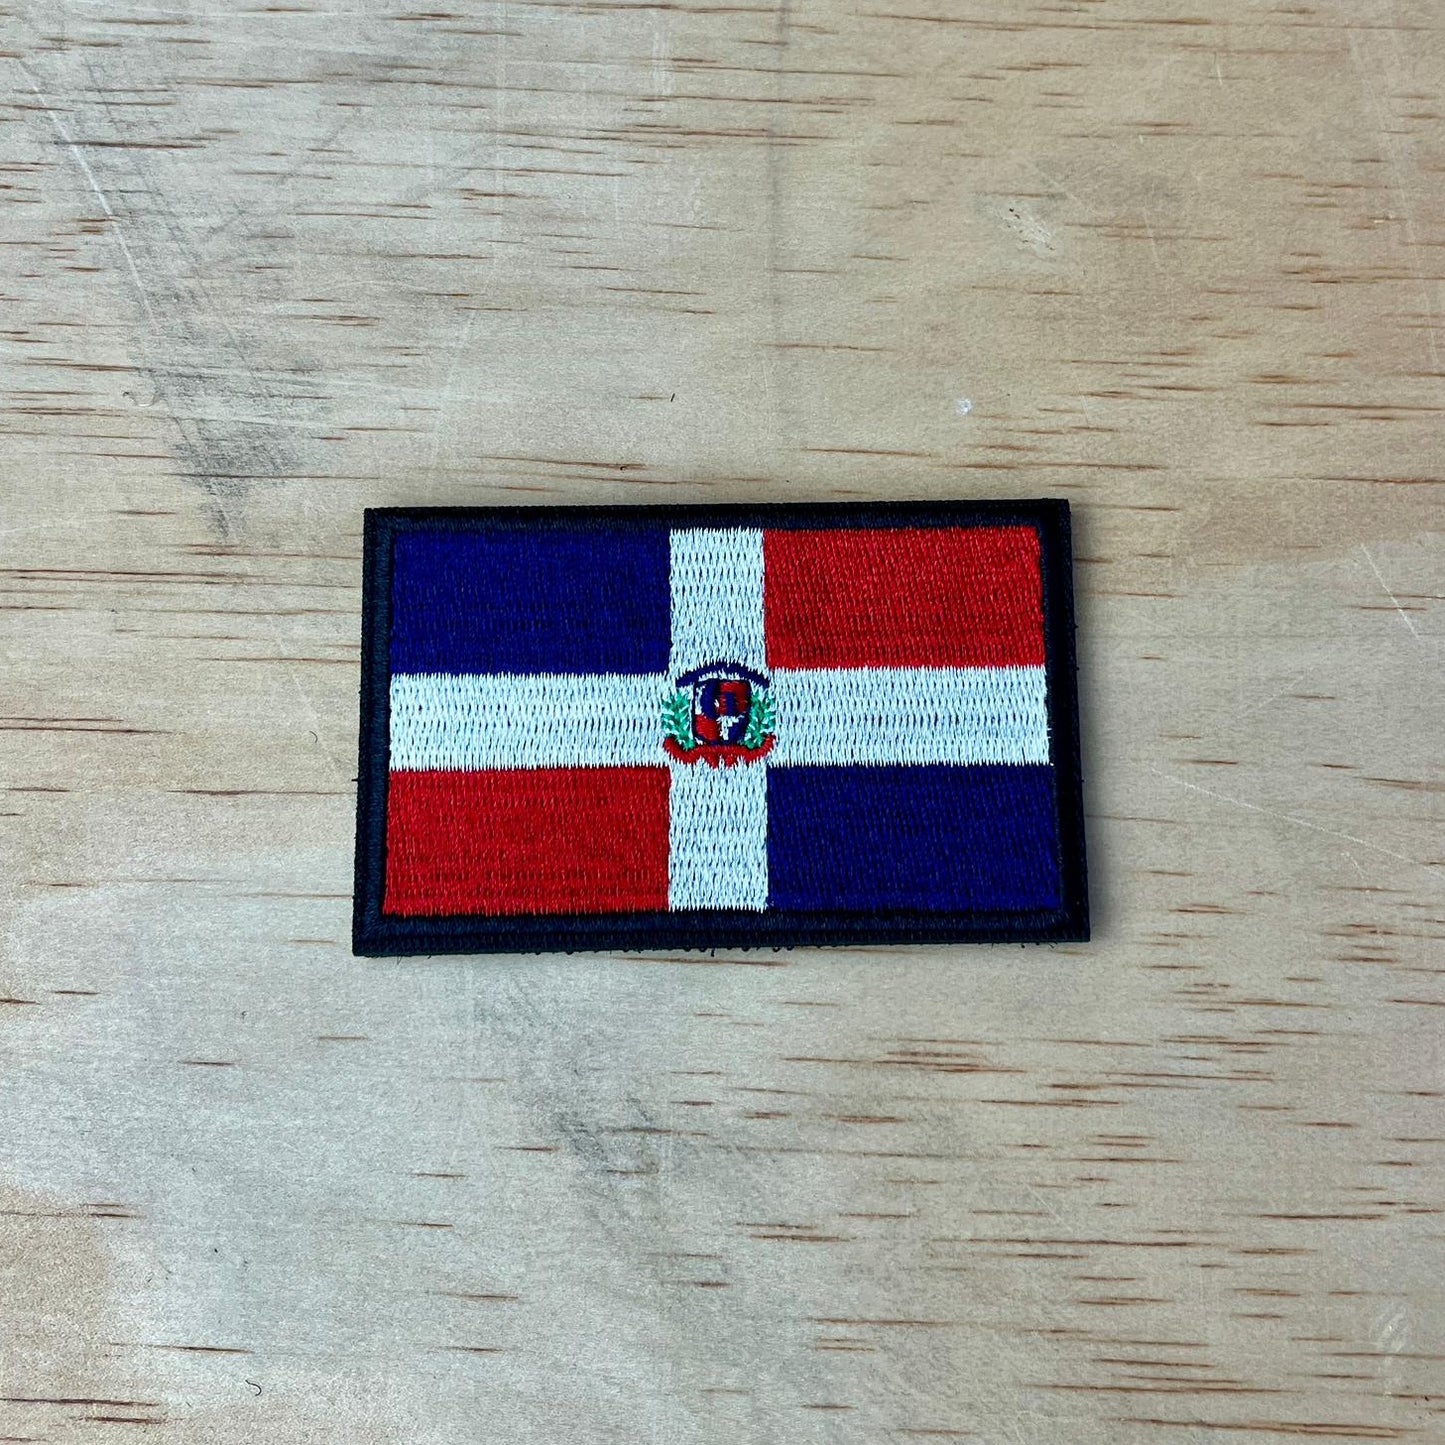 Dominica patch